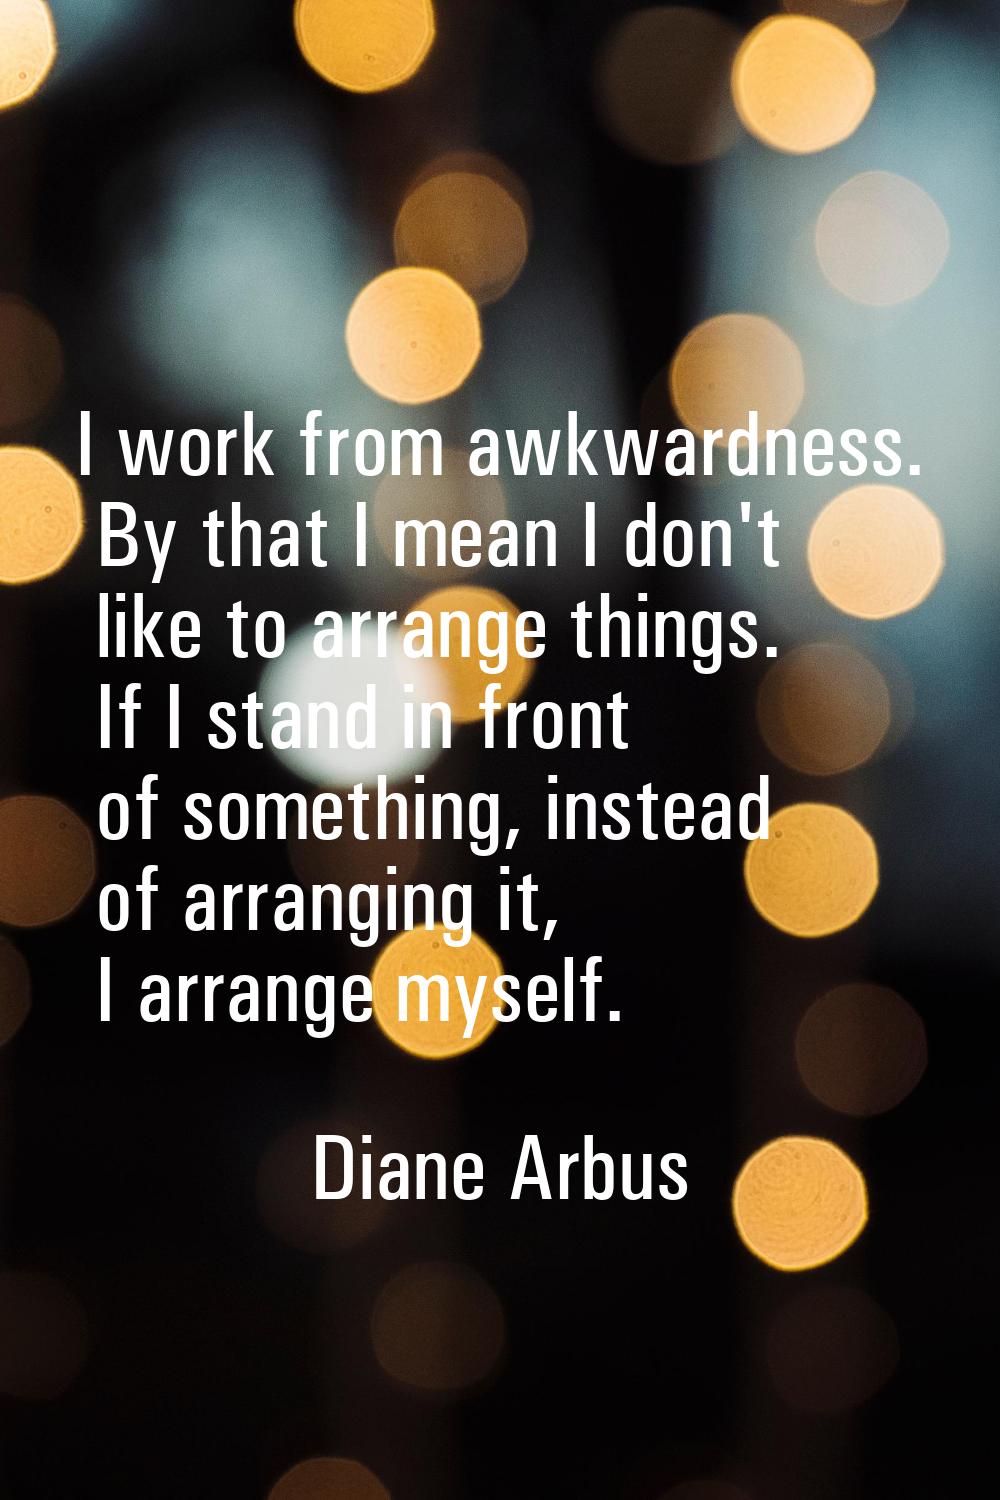 I work from awkwardness. By that I mean I don't like to arrange things. If I stand in front of some